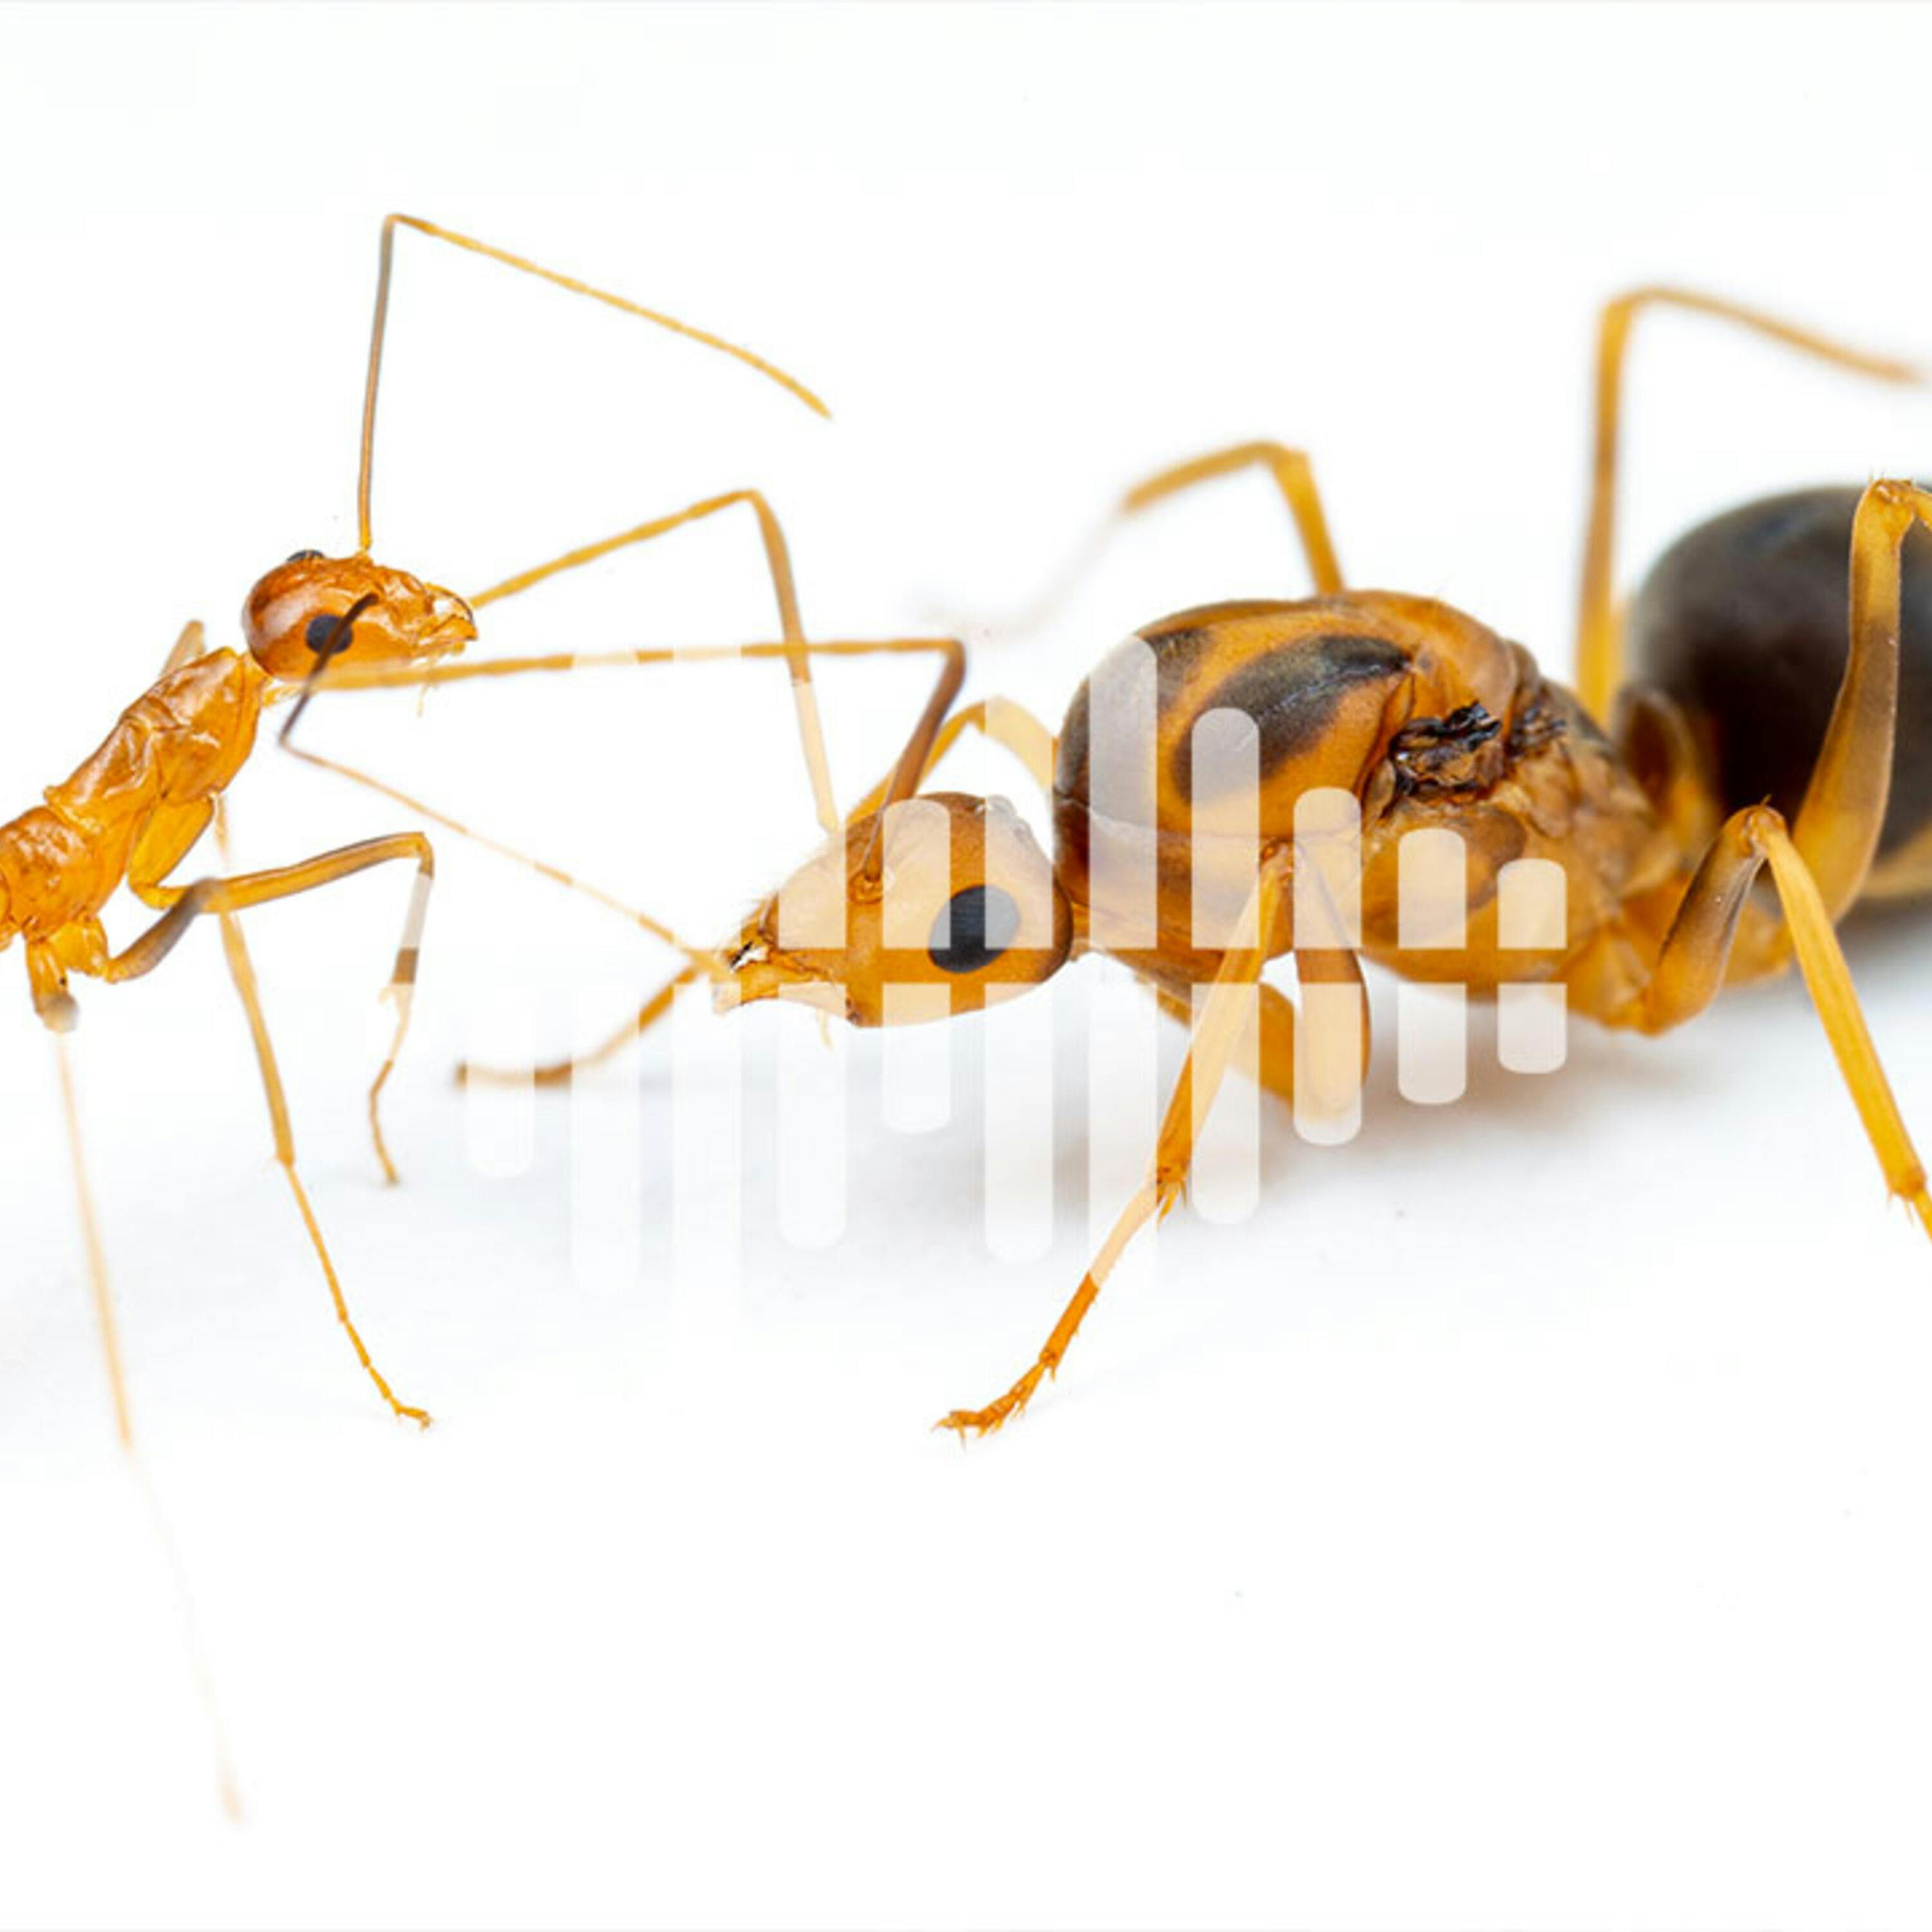 Why not vaccinate chickens against avian flu, and new form of reproduction found in yellow crazy ants